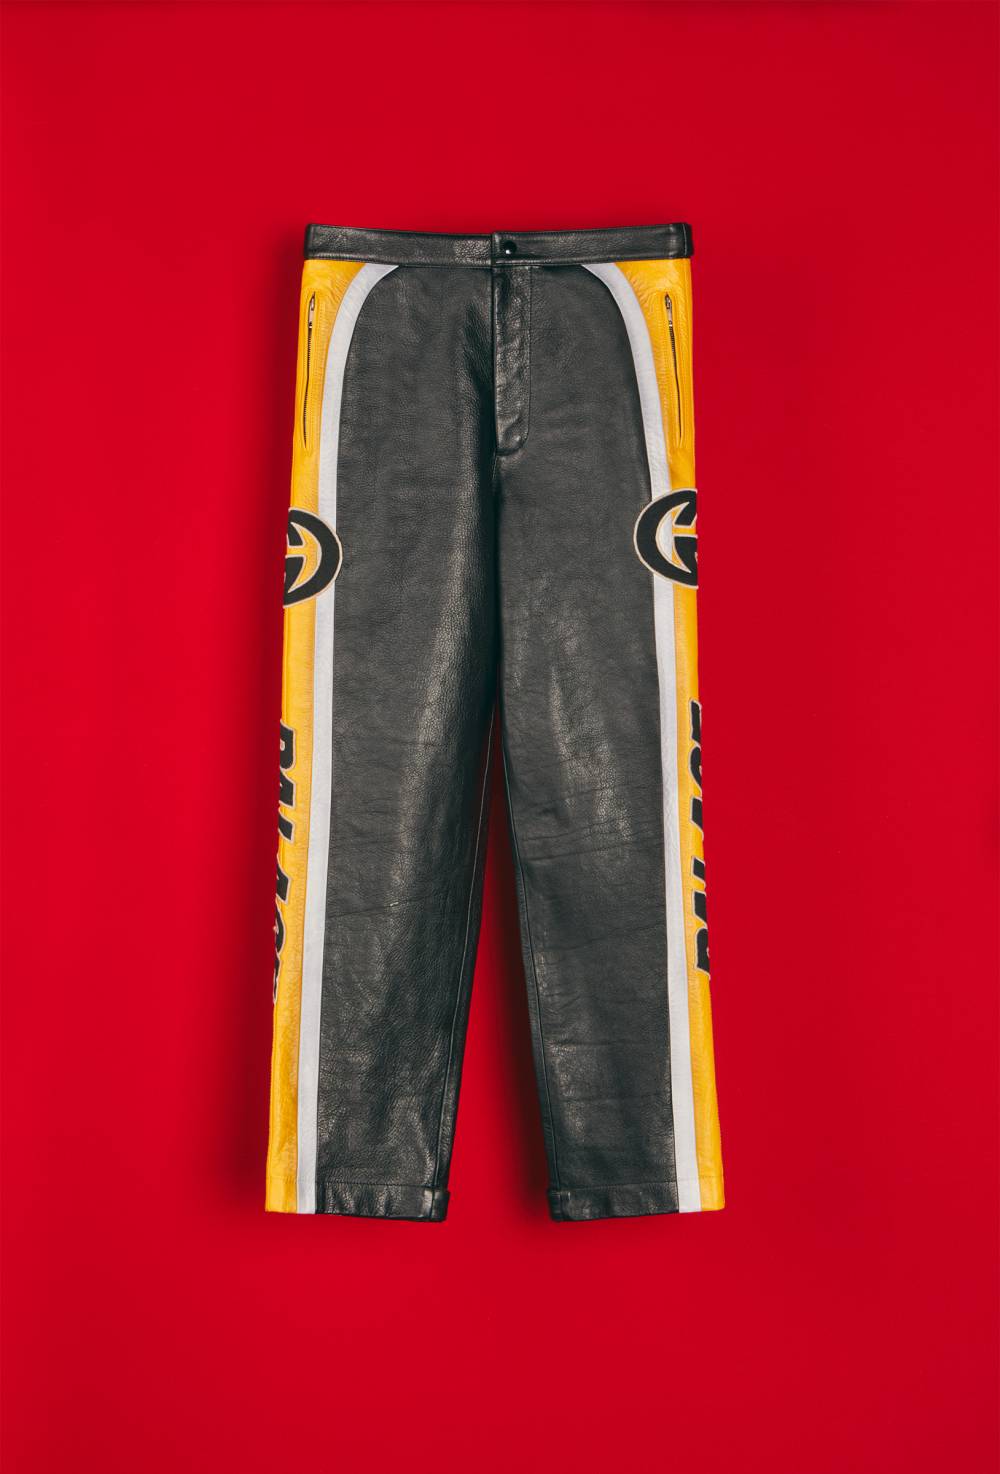 Leather pants with patches by Palace Gucci image #1